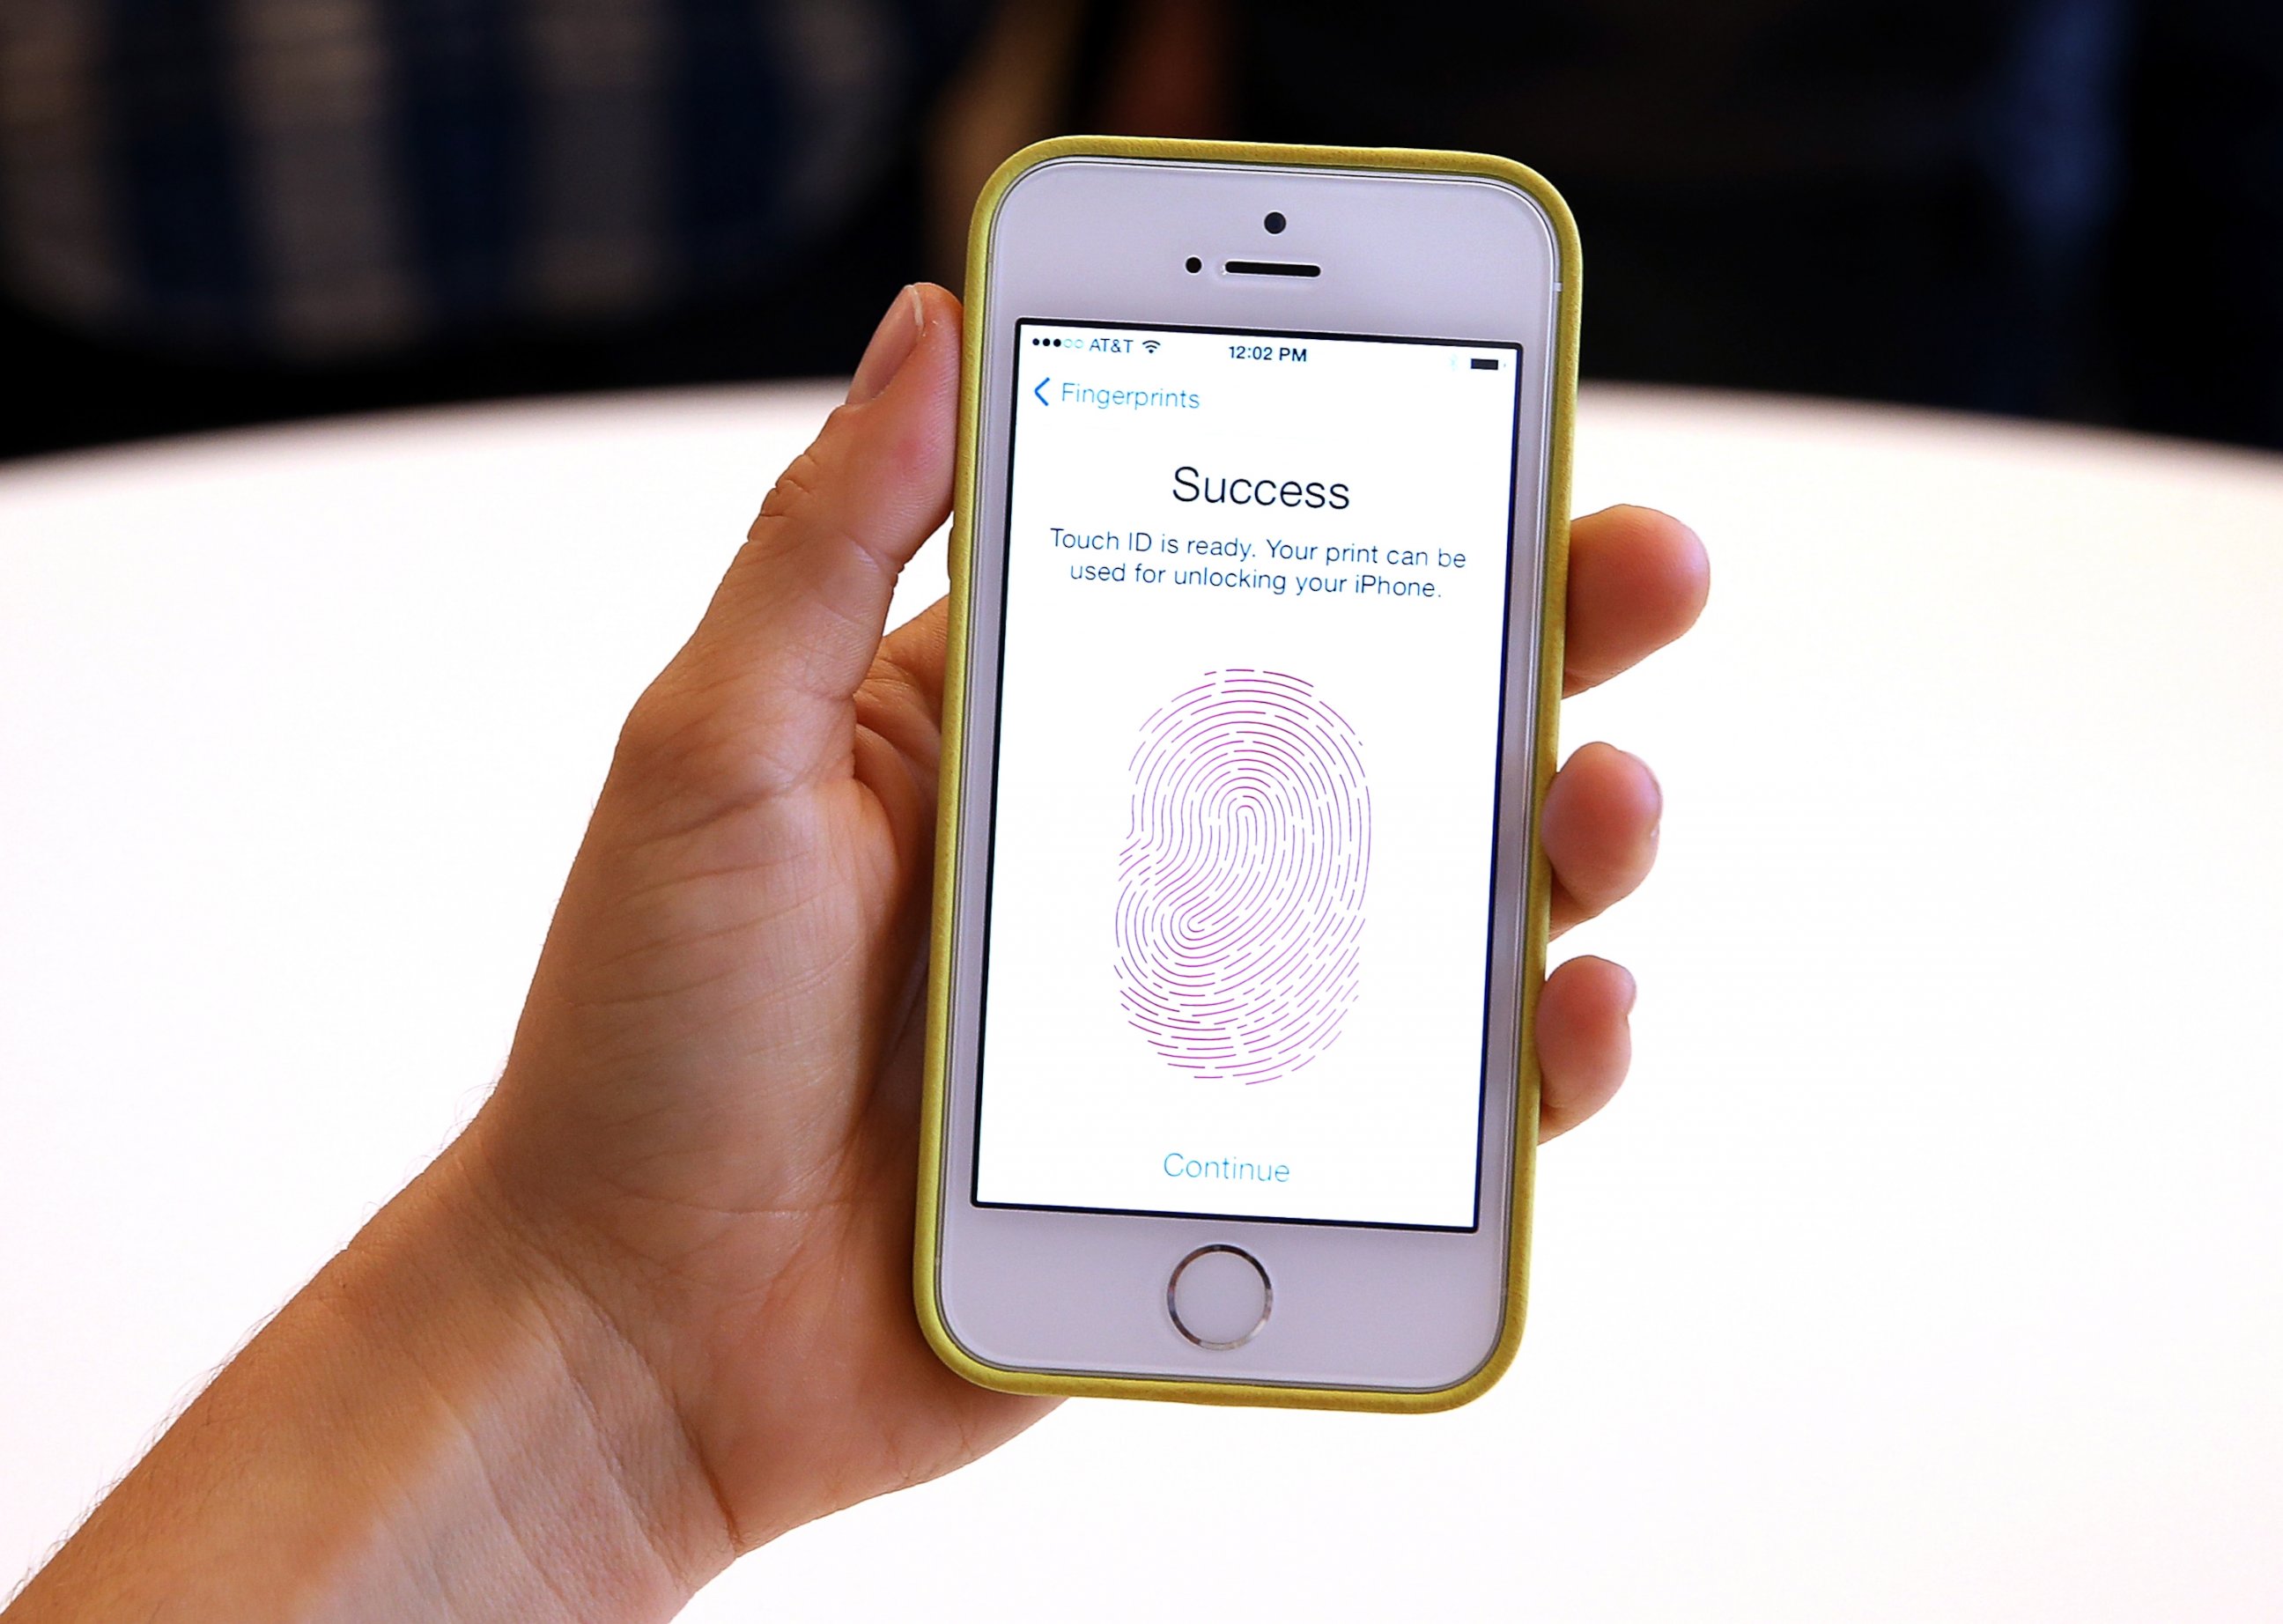 PHOTO: The new iPhone 5S with fingerprint technology is displayed during an Apple product announcement at the Apple campus, Sept. 10, 2013, in Cupertino, Calif.